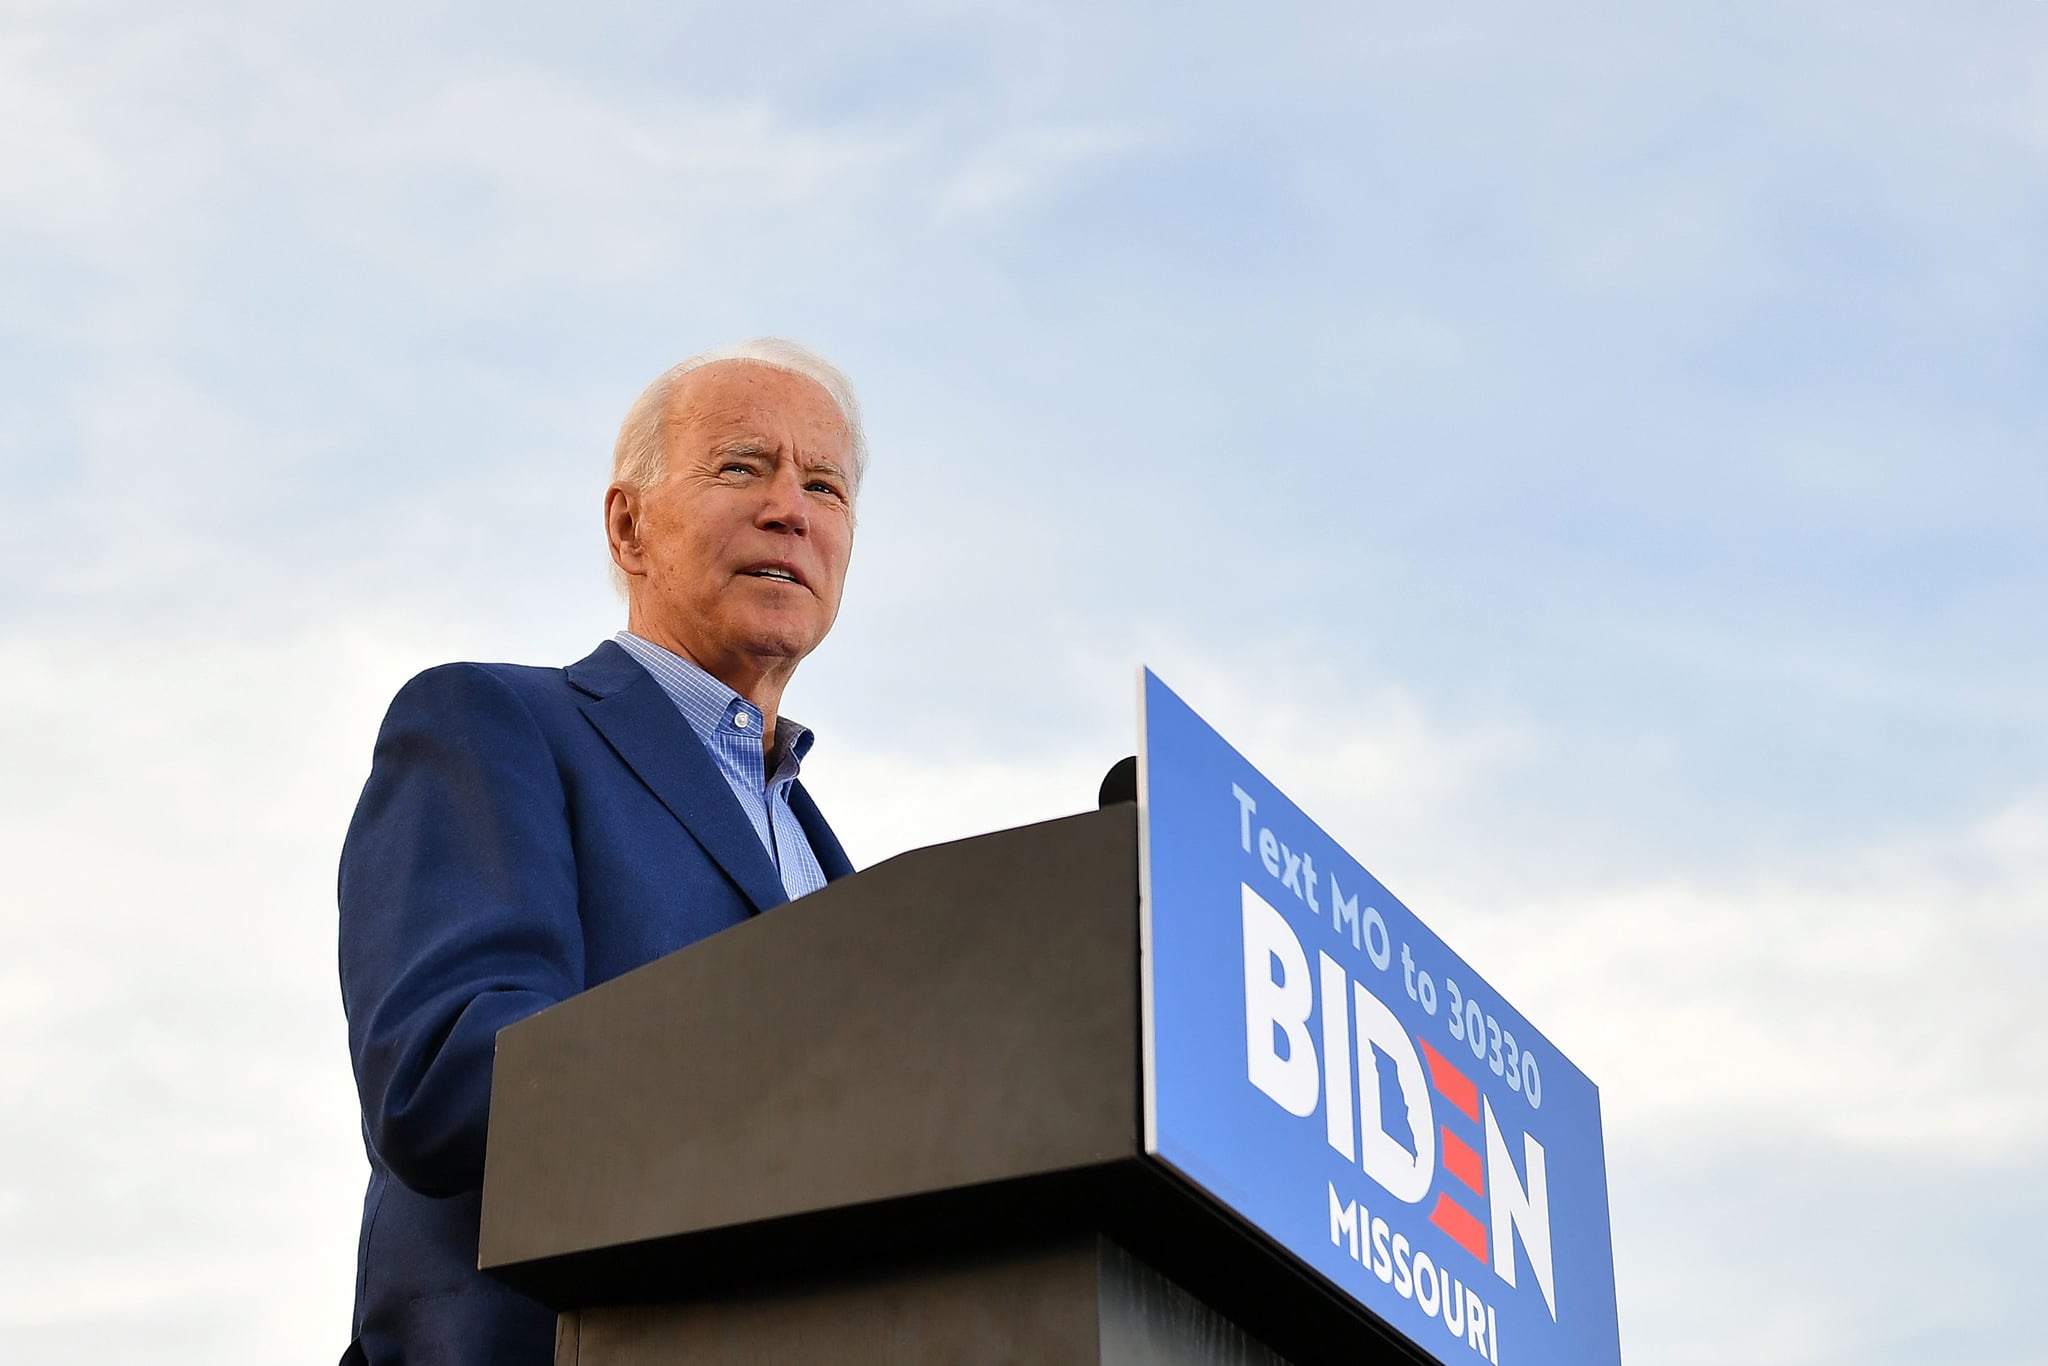 Democratic presidential candidate former Vice President Joe Biden speaks during a campaign rally at the WWI Museum and Memorial in Kansas City, Missouri on March 7, 2020. (Photo by MANDEL NGAN / AFP) (Photo by MANDEL NGAN/AFP via Getty Images)